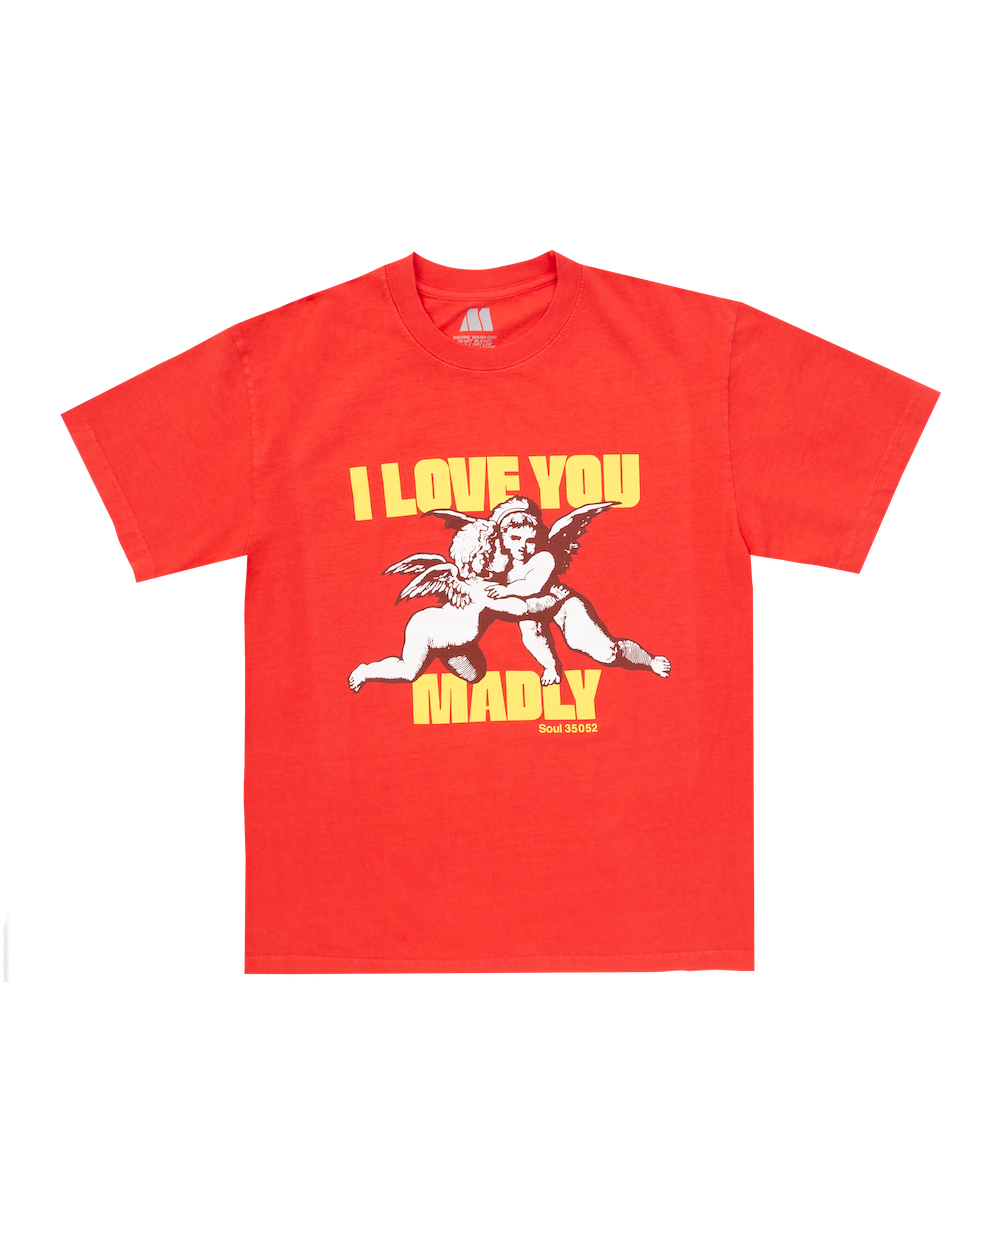 Red "Love You Madly" Tee